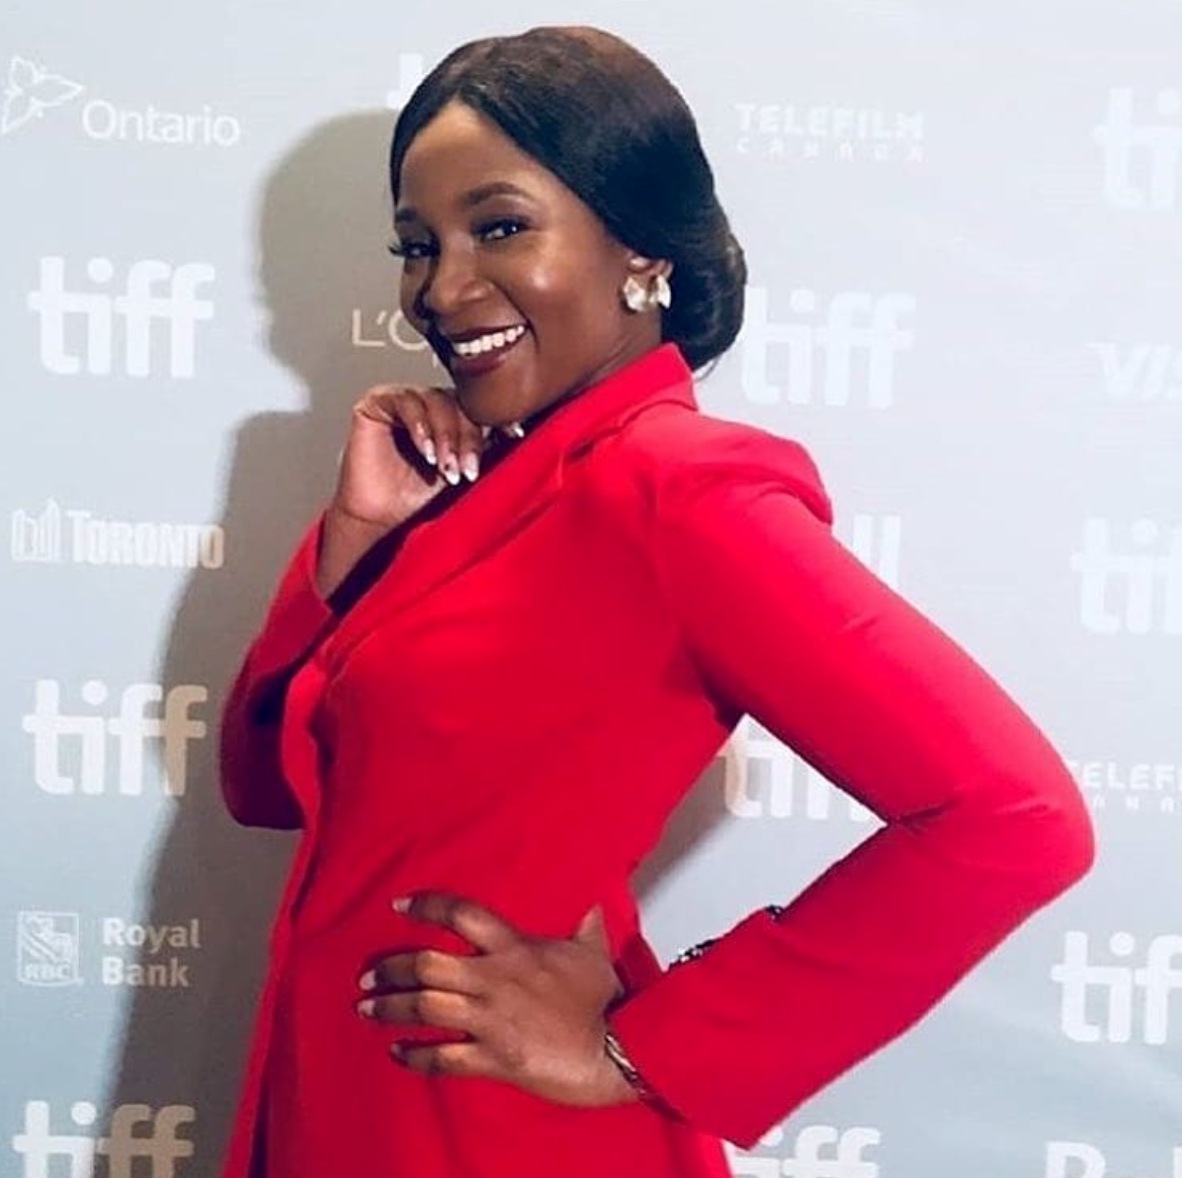 Genevieve Nnaji’s directorial debut, LionHeart, premieres at TIFF as Netflix acquires its rights